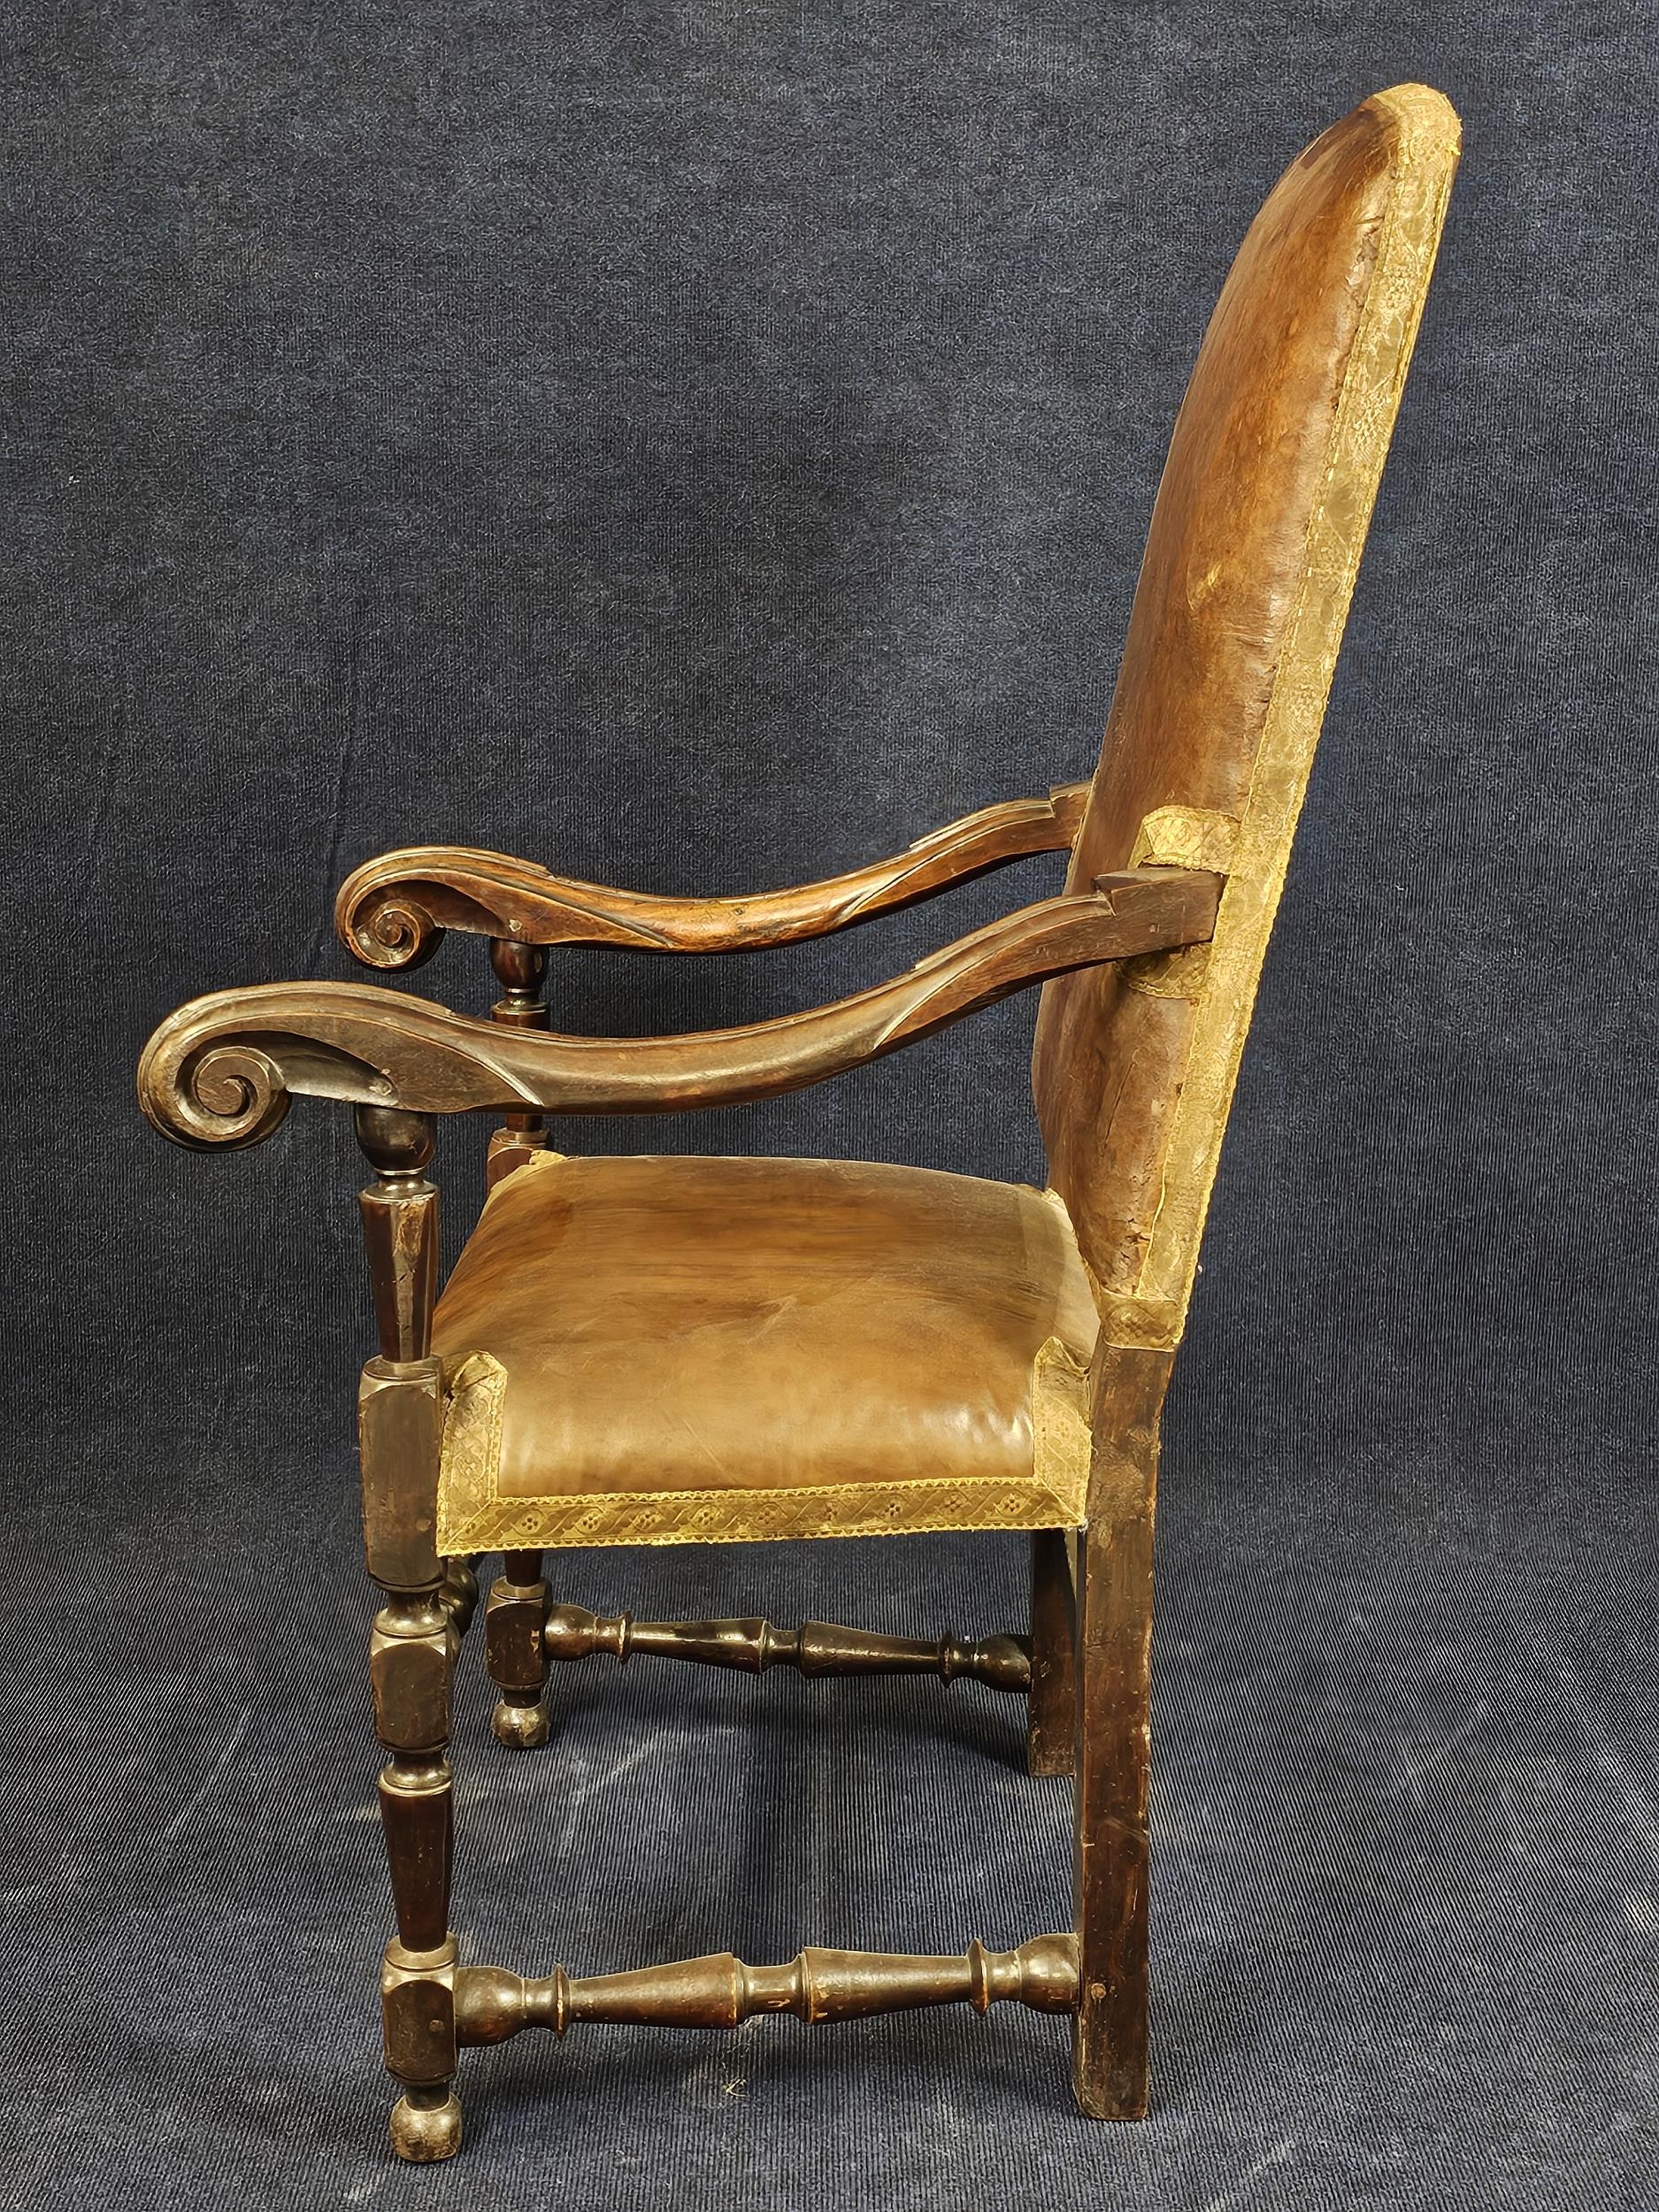 A 19th century Continental carved armchair in leather upholstery. - Image 4 of 6